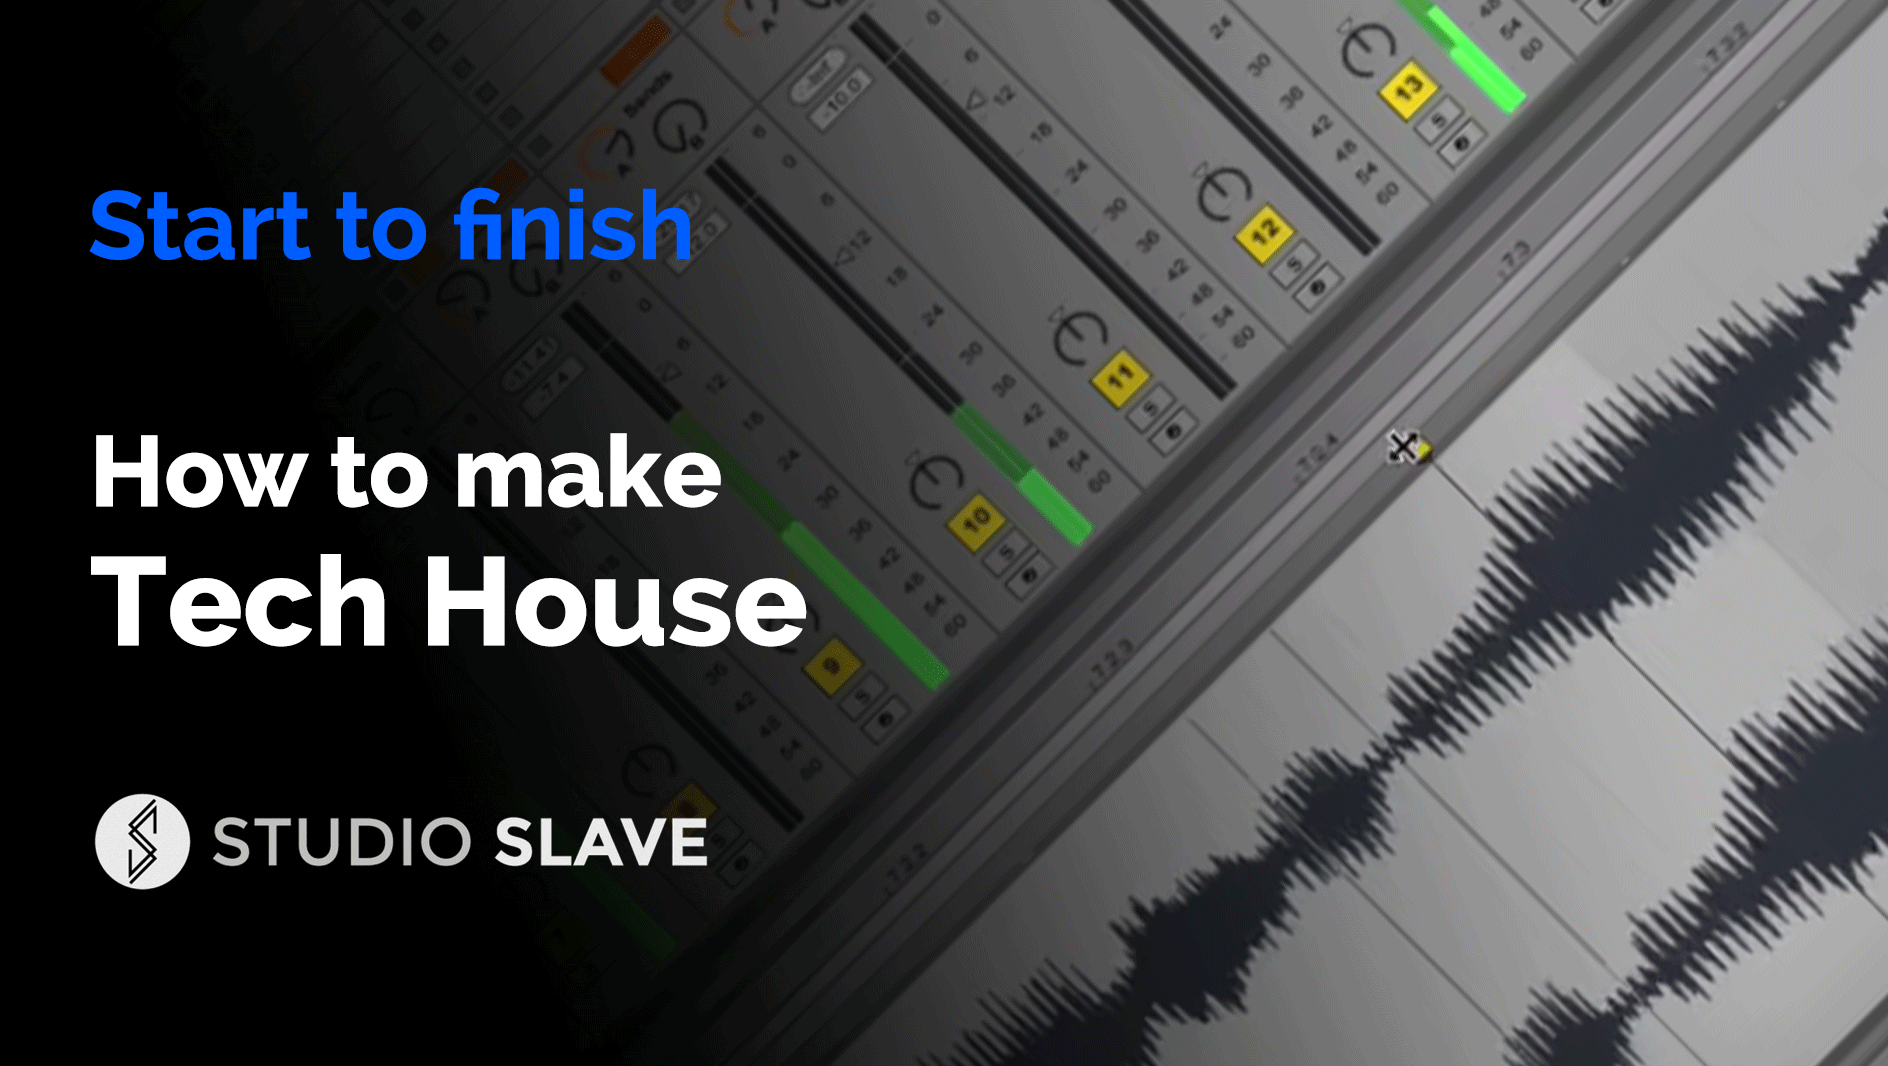 How To Make Tech House with Studio Slave